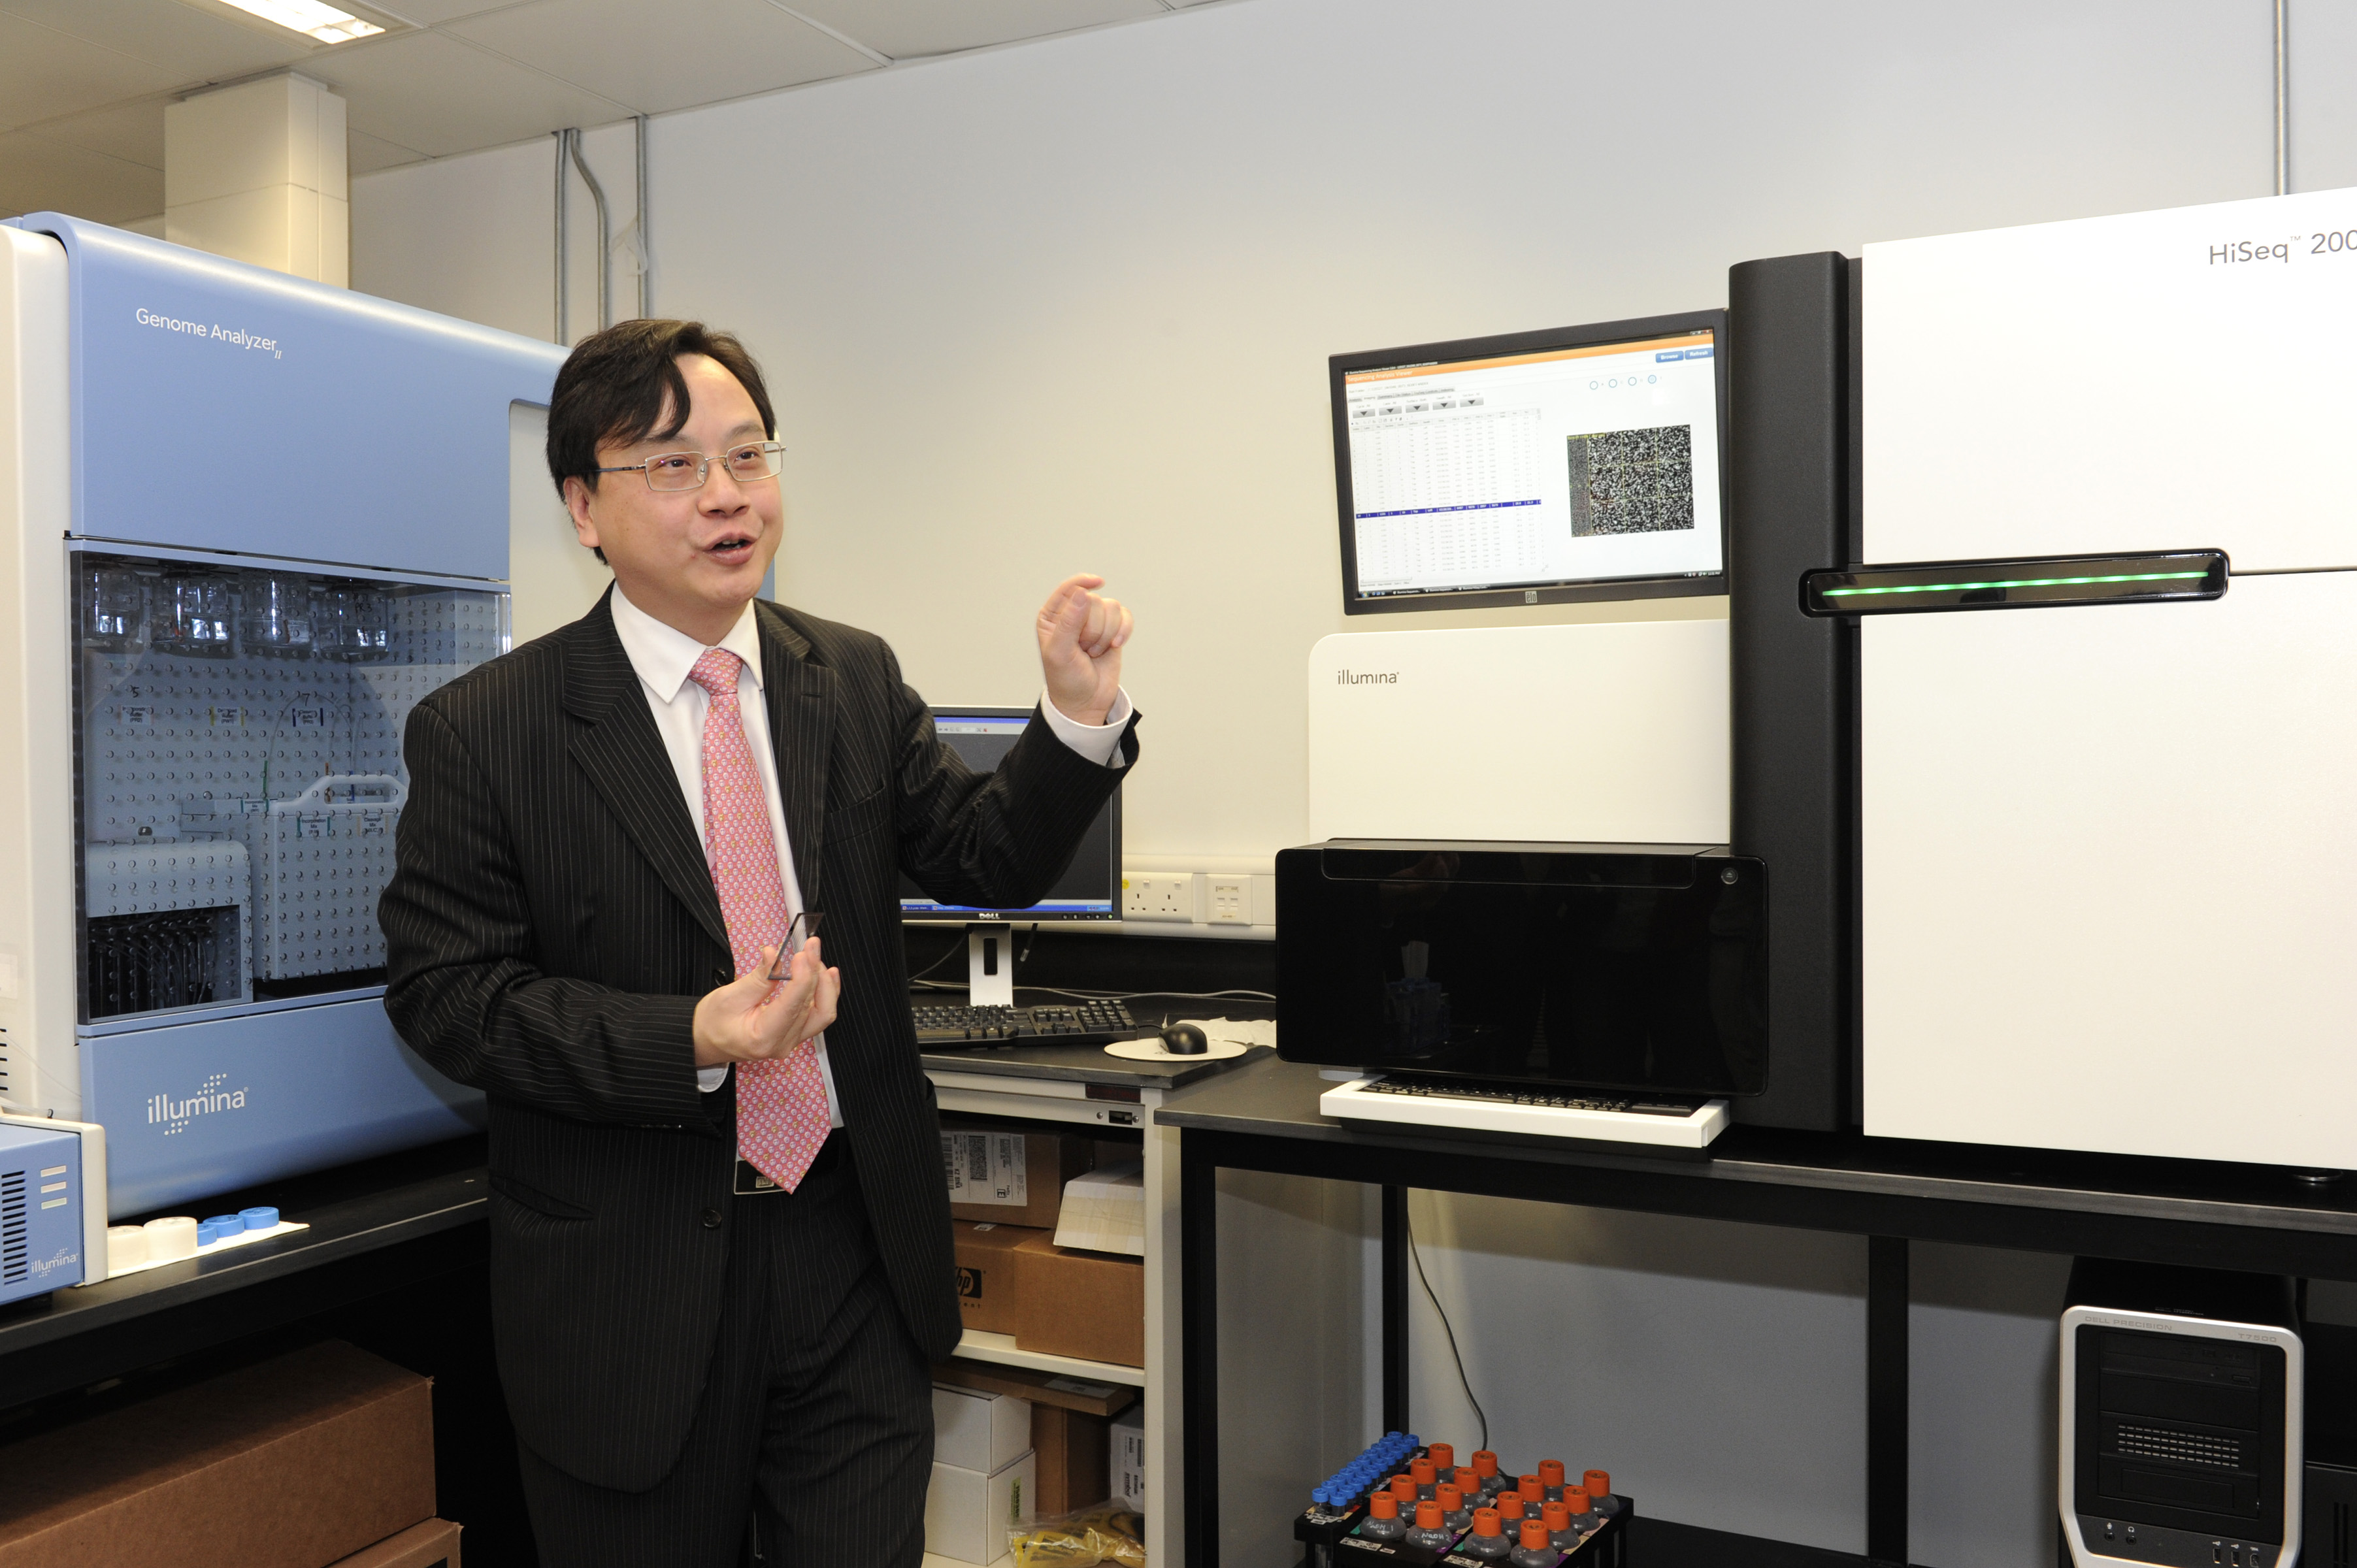 Prof. Lo Yuk-ming Dennis, Li Ka Shing Professor of Medicine and Chairman of Department of Chemical Pathology, CUHK introduces 'safeT21' (sensitive analysis of fetal DNA for T21 screening) test as a clinical service for the non-invasive prenatal diagnosis of Down syndrome by using the state-of-the-art DNA sequencing technologies to analyse millions of DNA fragments from a mother's blood plasma to determine if there is an elevation in the amount of chromosome 21 DNA molecules which suggests the presence of a Down syndrome fetus.